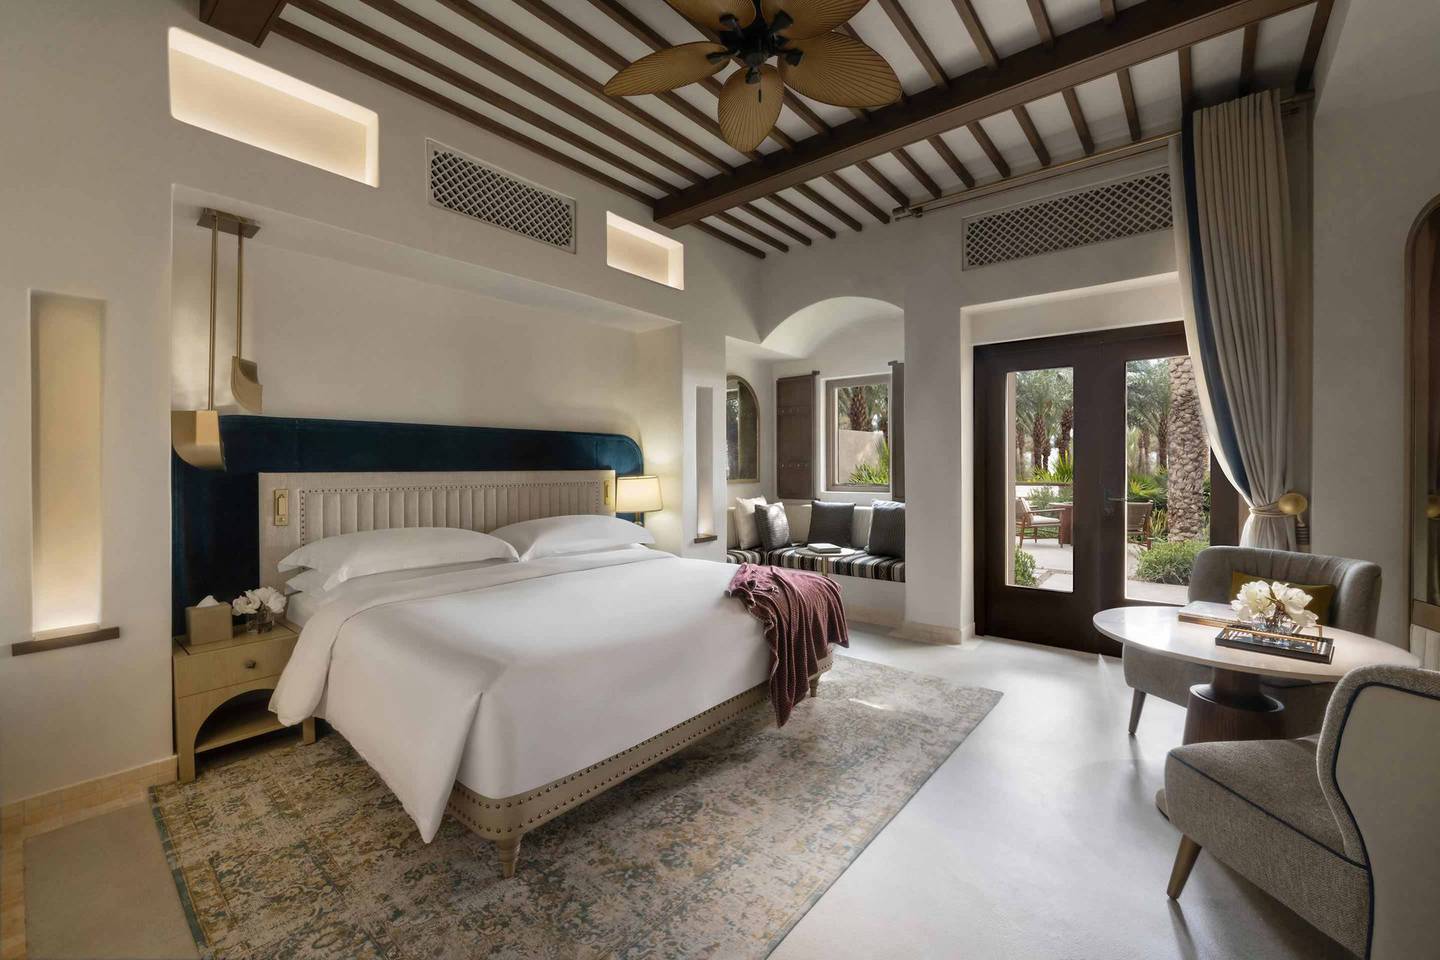 Newly renovated rooms and suites await guests checking into Bab Al Shams in 2023. Photo: Bab Al Shams